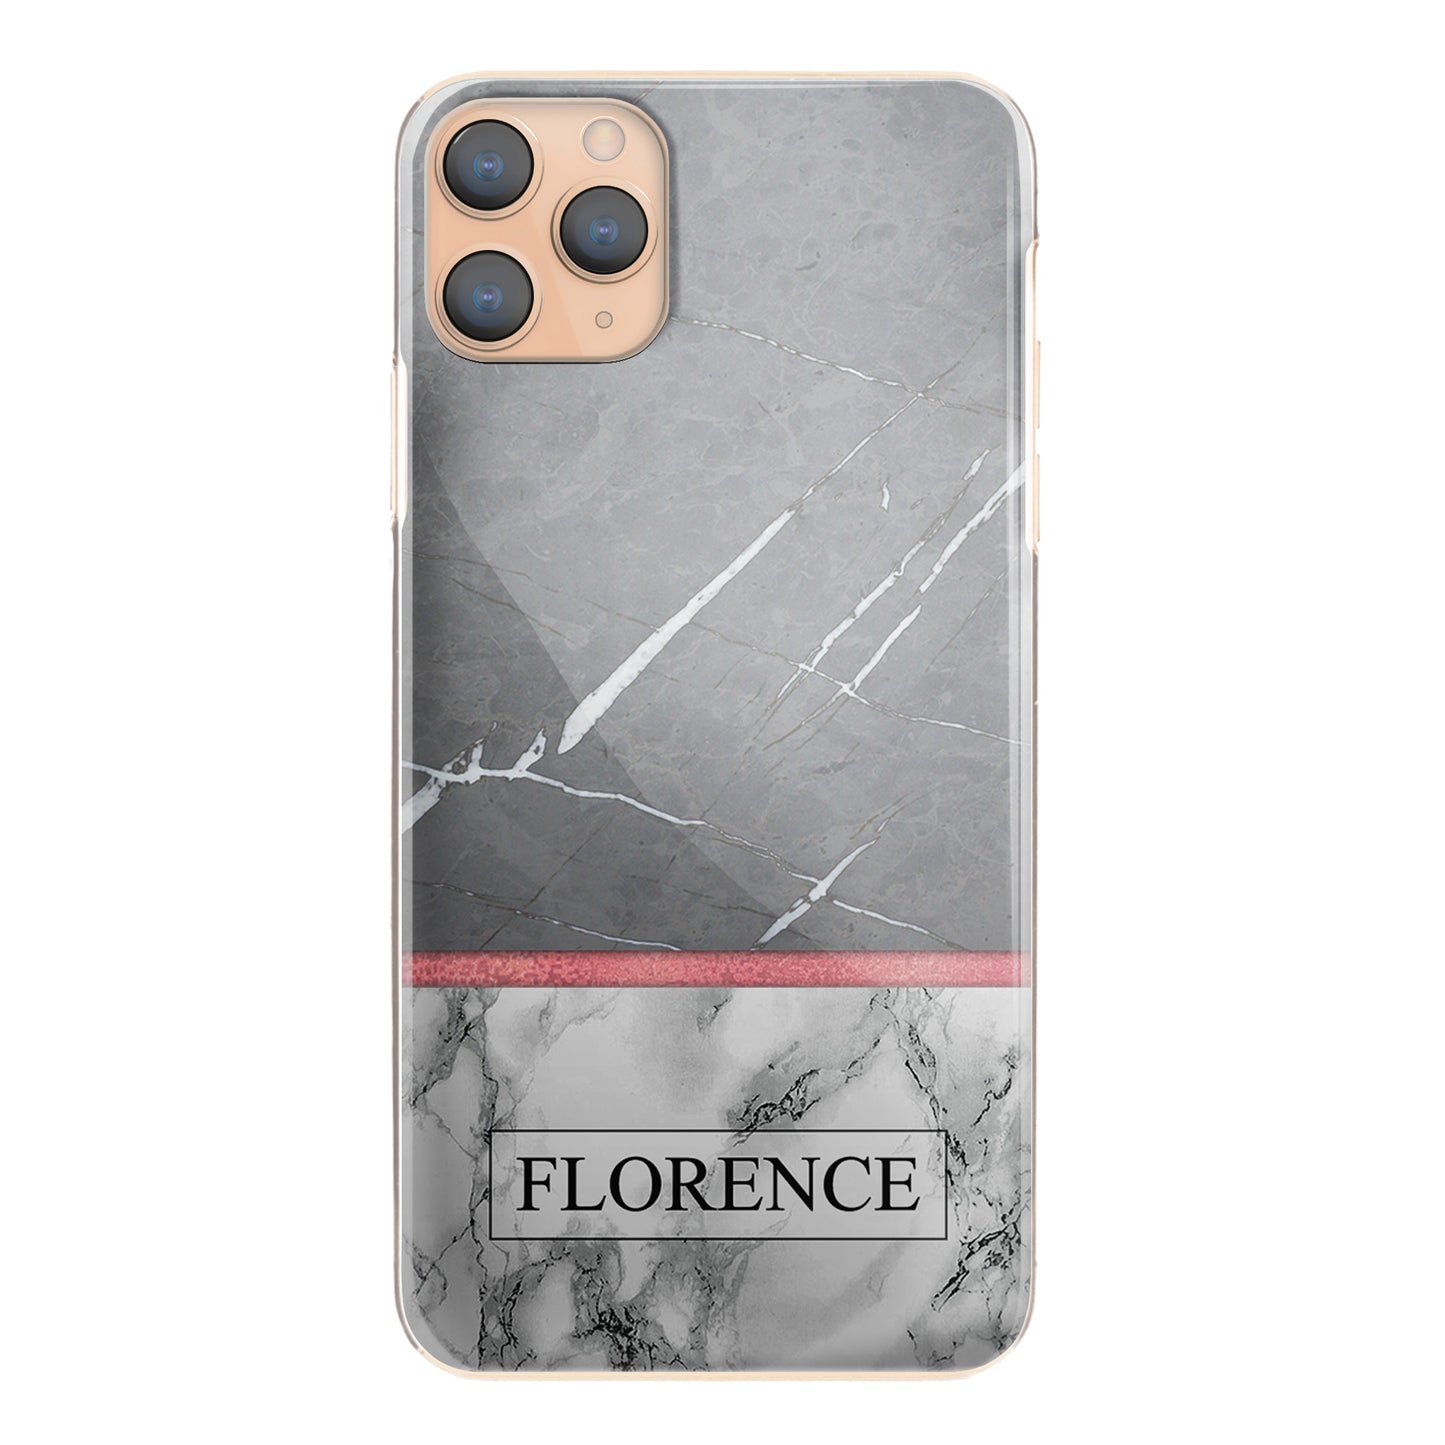 Personalised Samsung Galaxy Phone Hard Case with Classy Text on Stylish Dual Marble